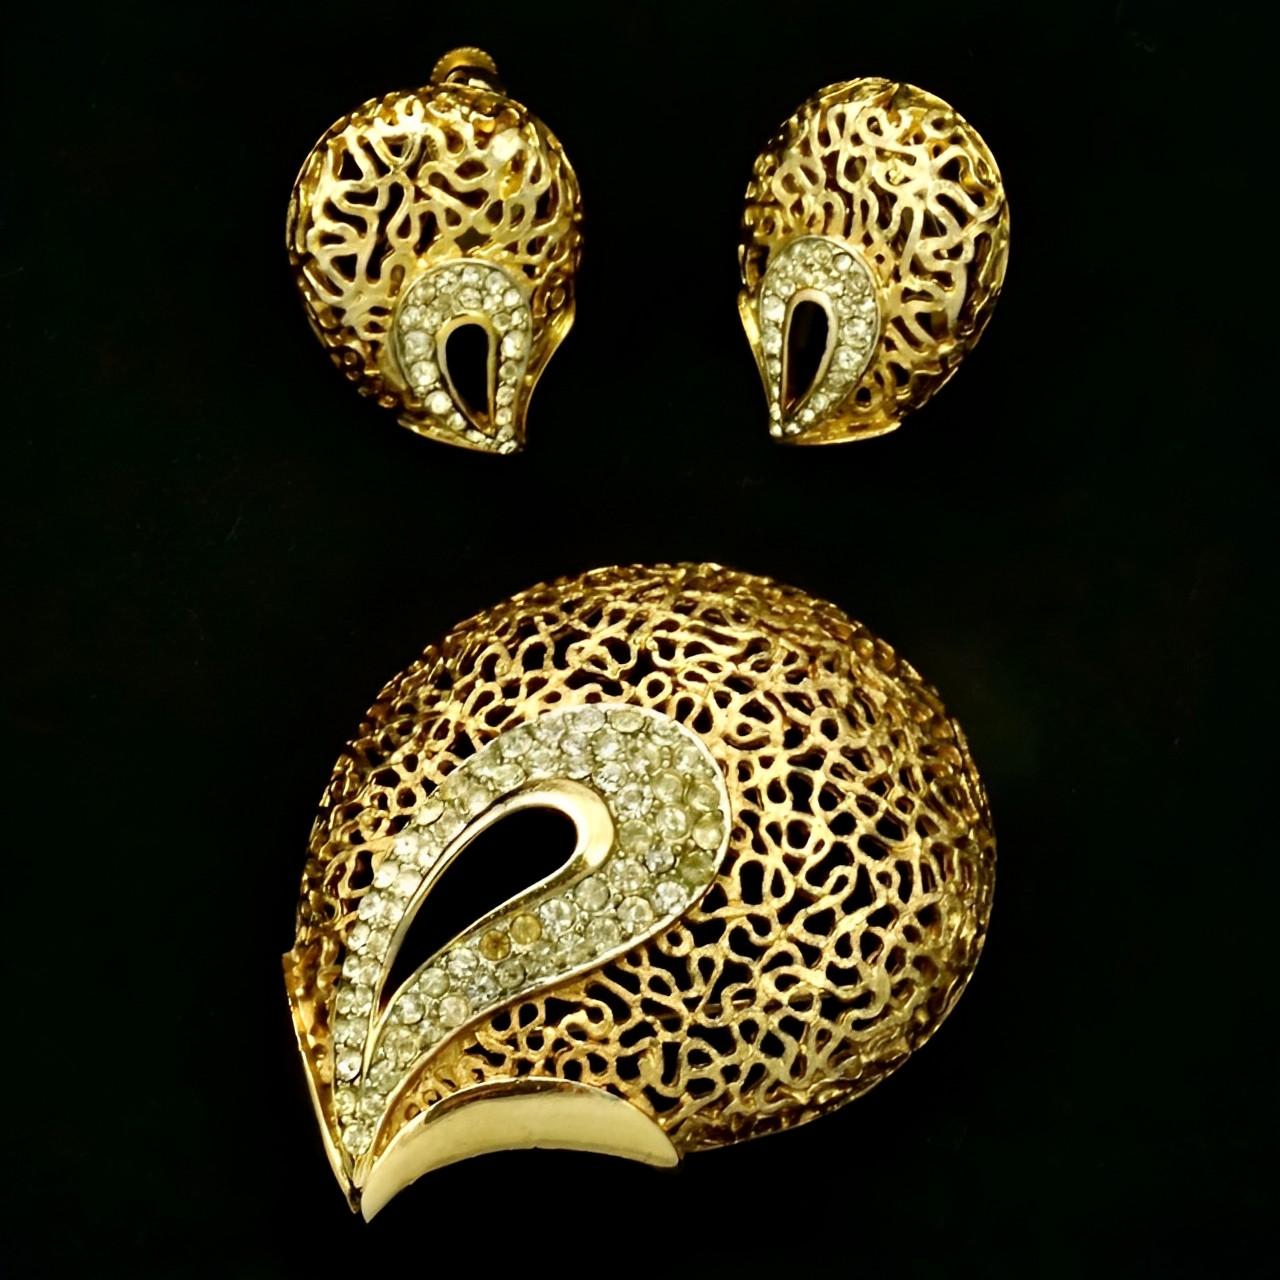 Jewelcraft Gold Plated Textured Brooch and Earrings with Rhinestones circa 1960s For Sale 3